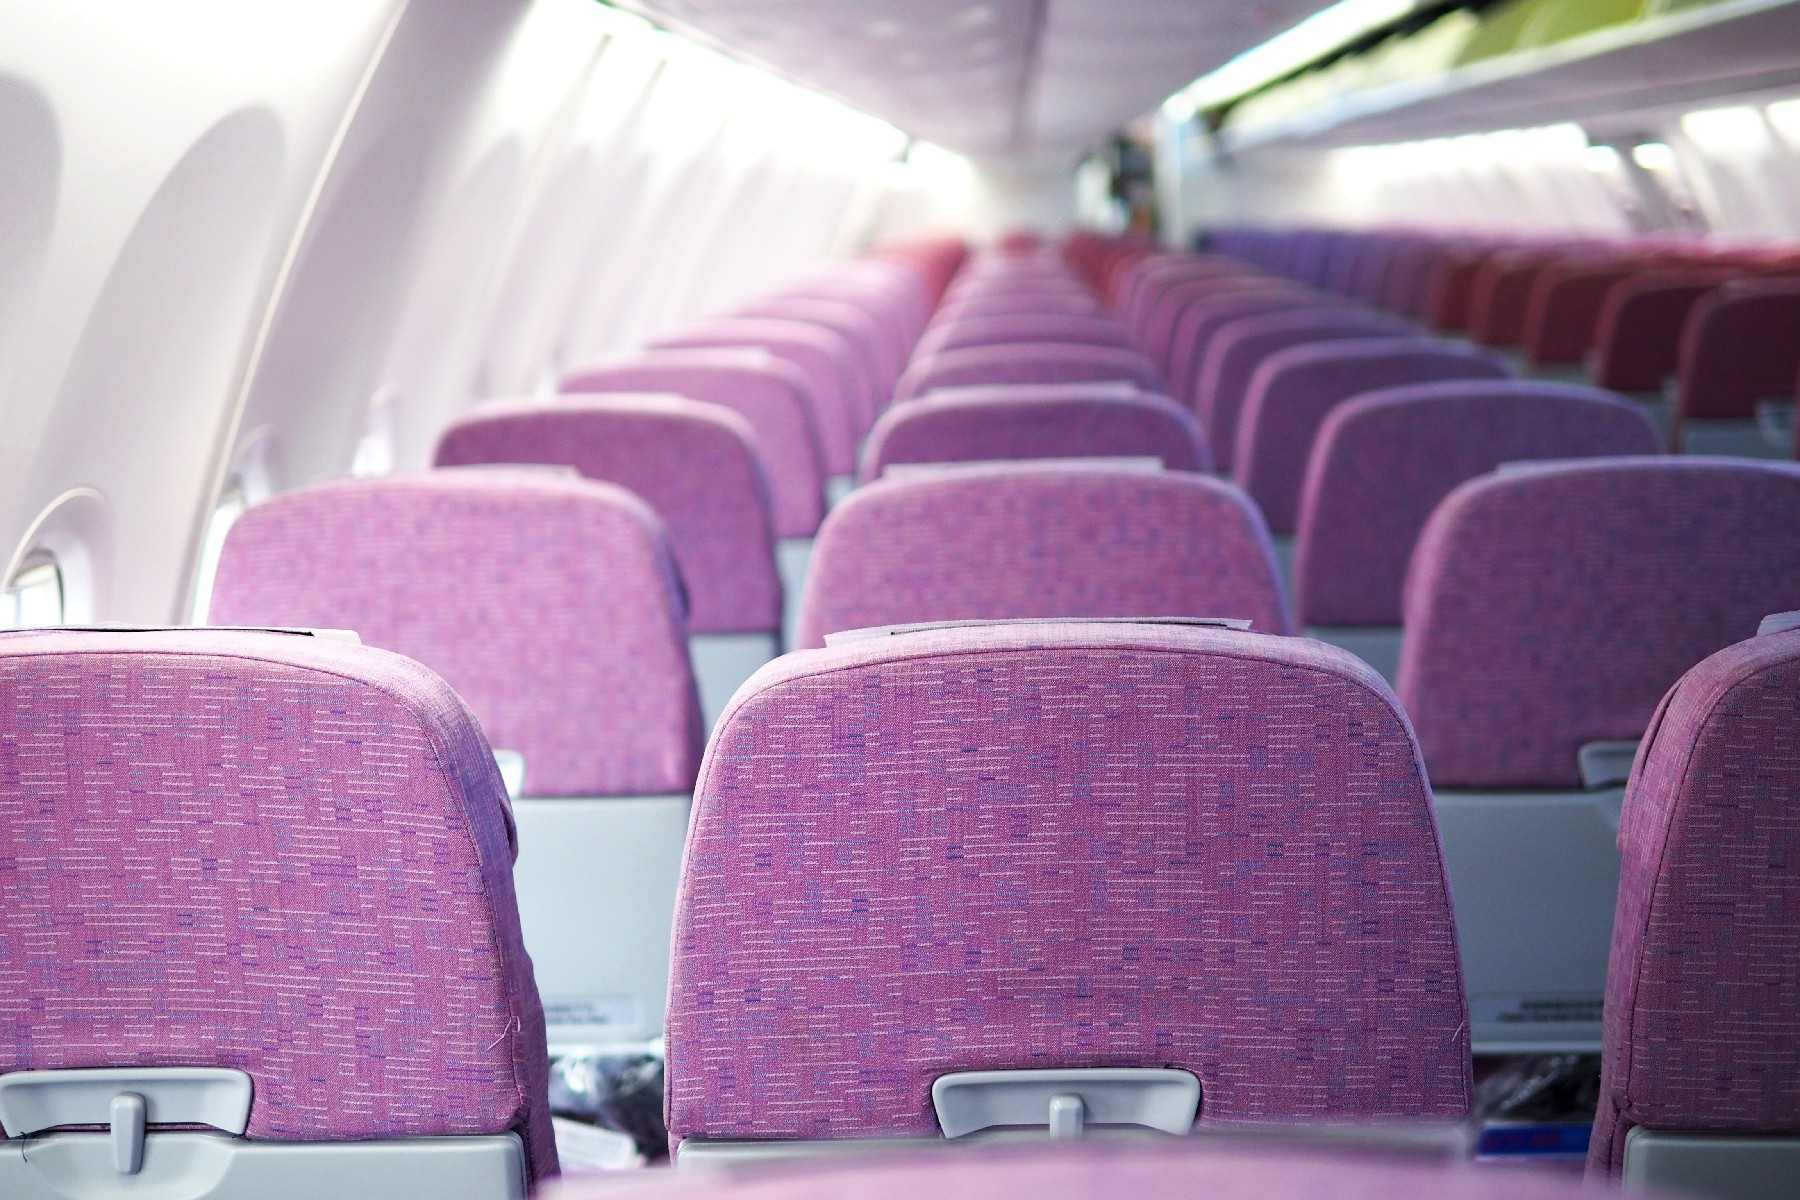 <p><a href="http://www.telegraph.co.uk/travel/travel-truths/Which-is-the-safest-seat-on-an-aircraft/" rel="noreferrer noopener">Statistics show</a> that in the event of a plane crash (knock on wood), you have a better chance of survival if seated at the back of the plane rather than up front in first class. Producers of the documentary <em>The Crash </em>actually arranged to crash a Boeing 727—equipped with cameras, sensors and dummies with breakable “bones”—into the Sonoran desert to prove it.</p>